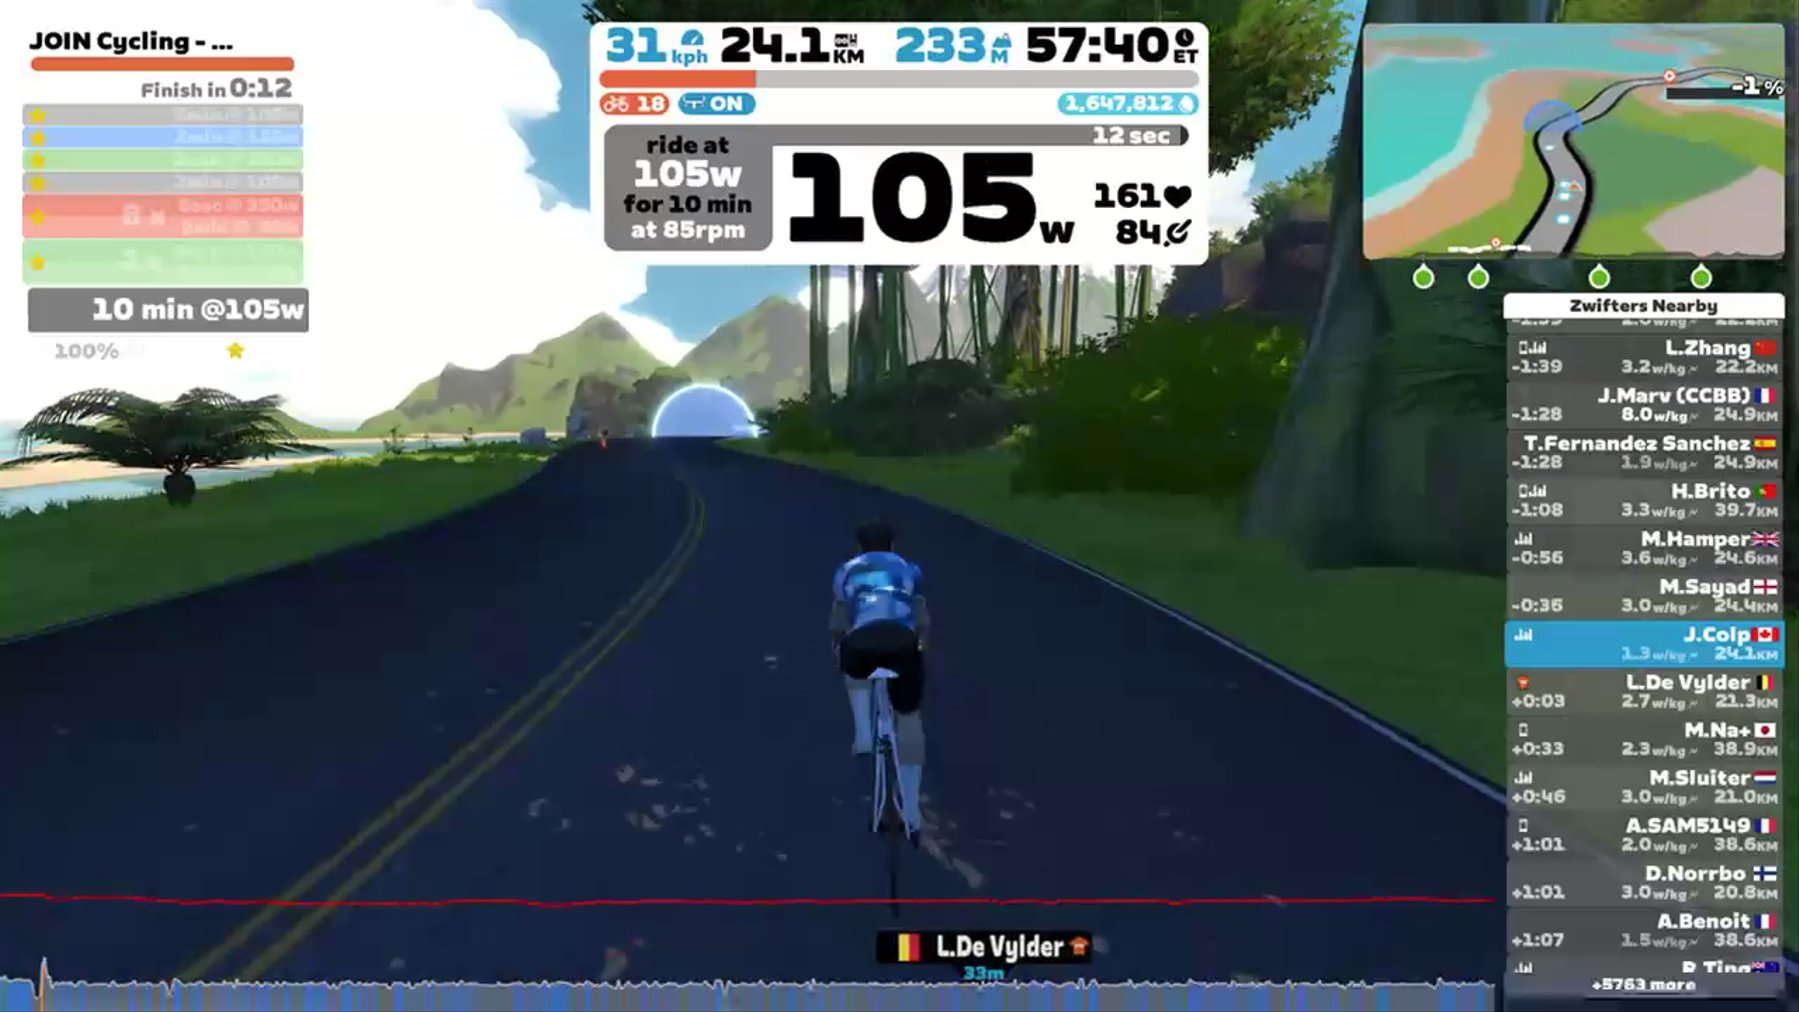 Zwift - JOIN Cycling - Seated sprints + tempo intervals in Watopia